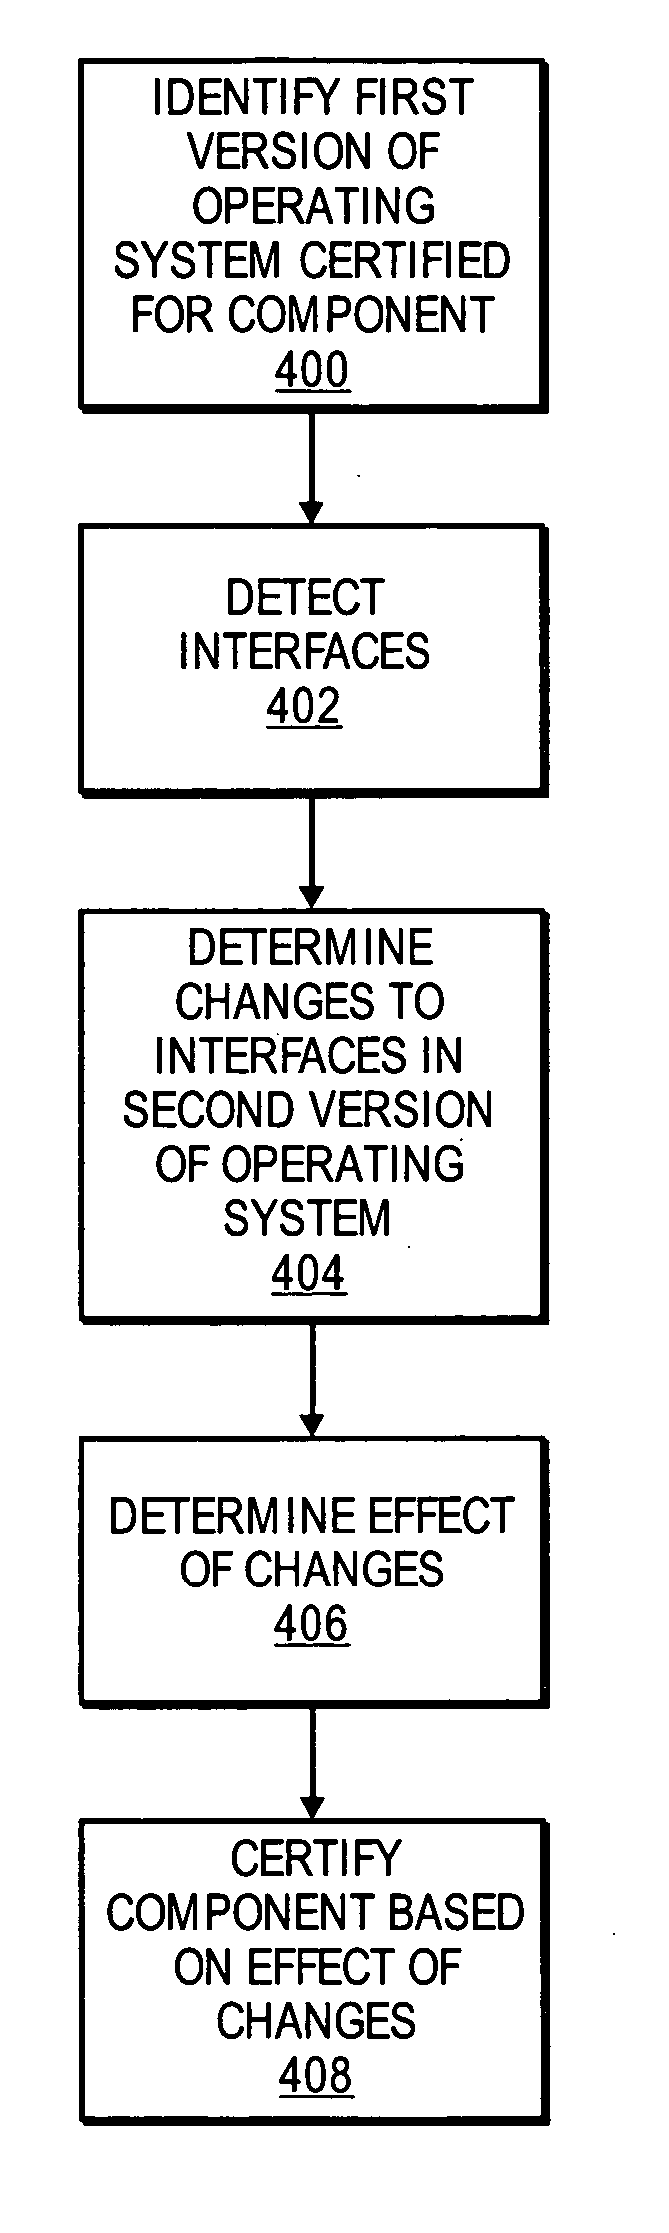 Certifying a software application based on identifying interface usage